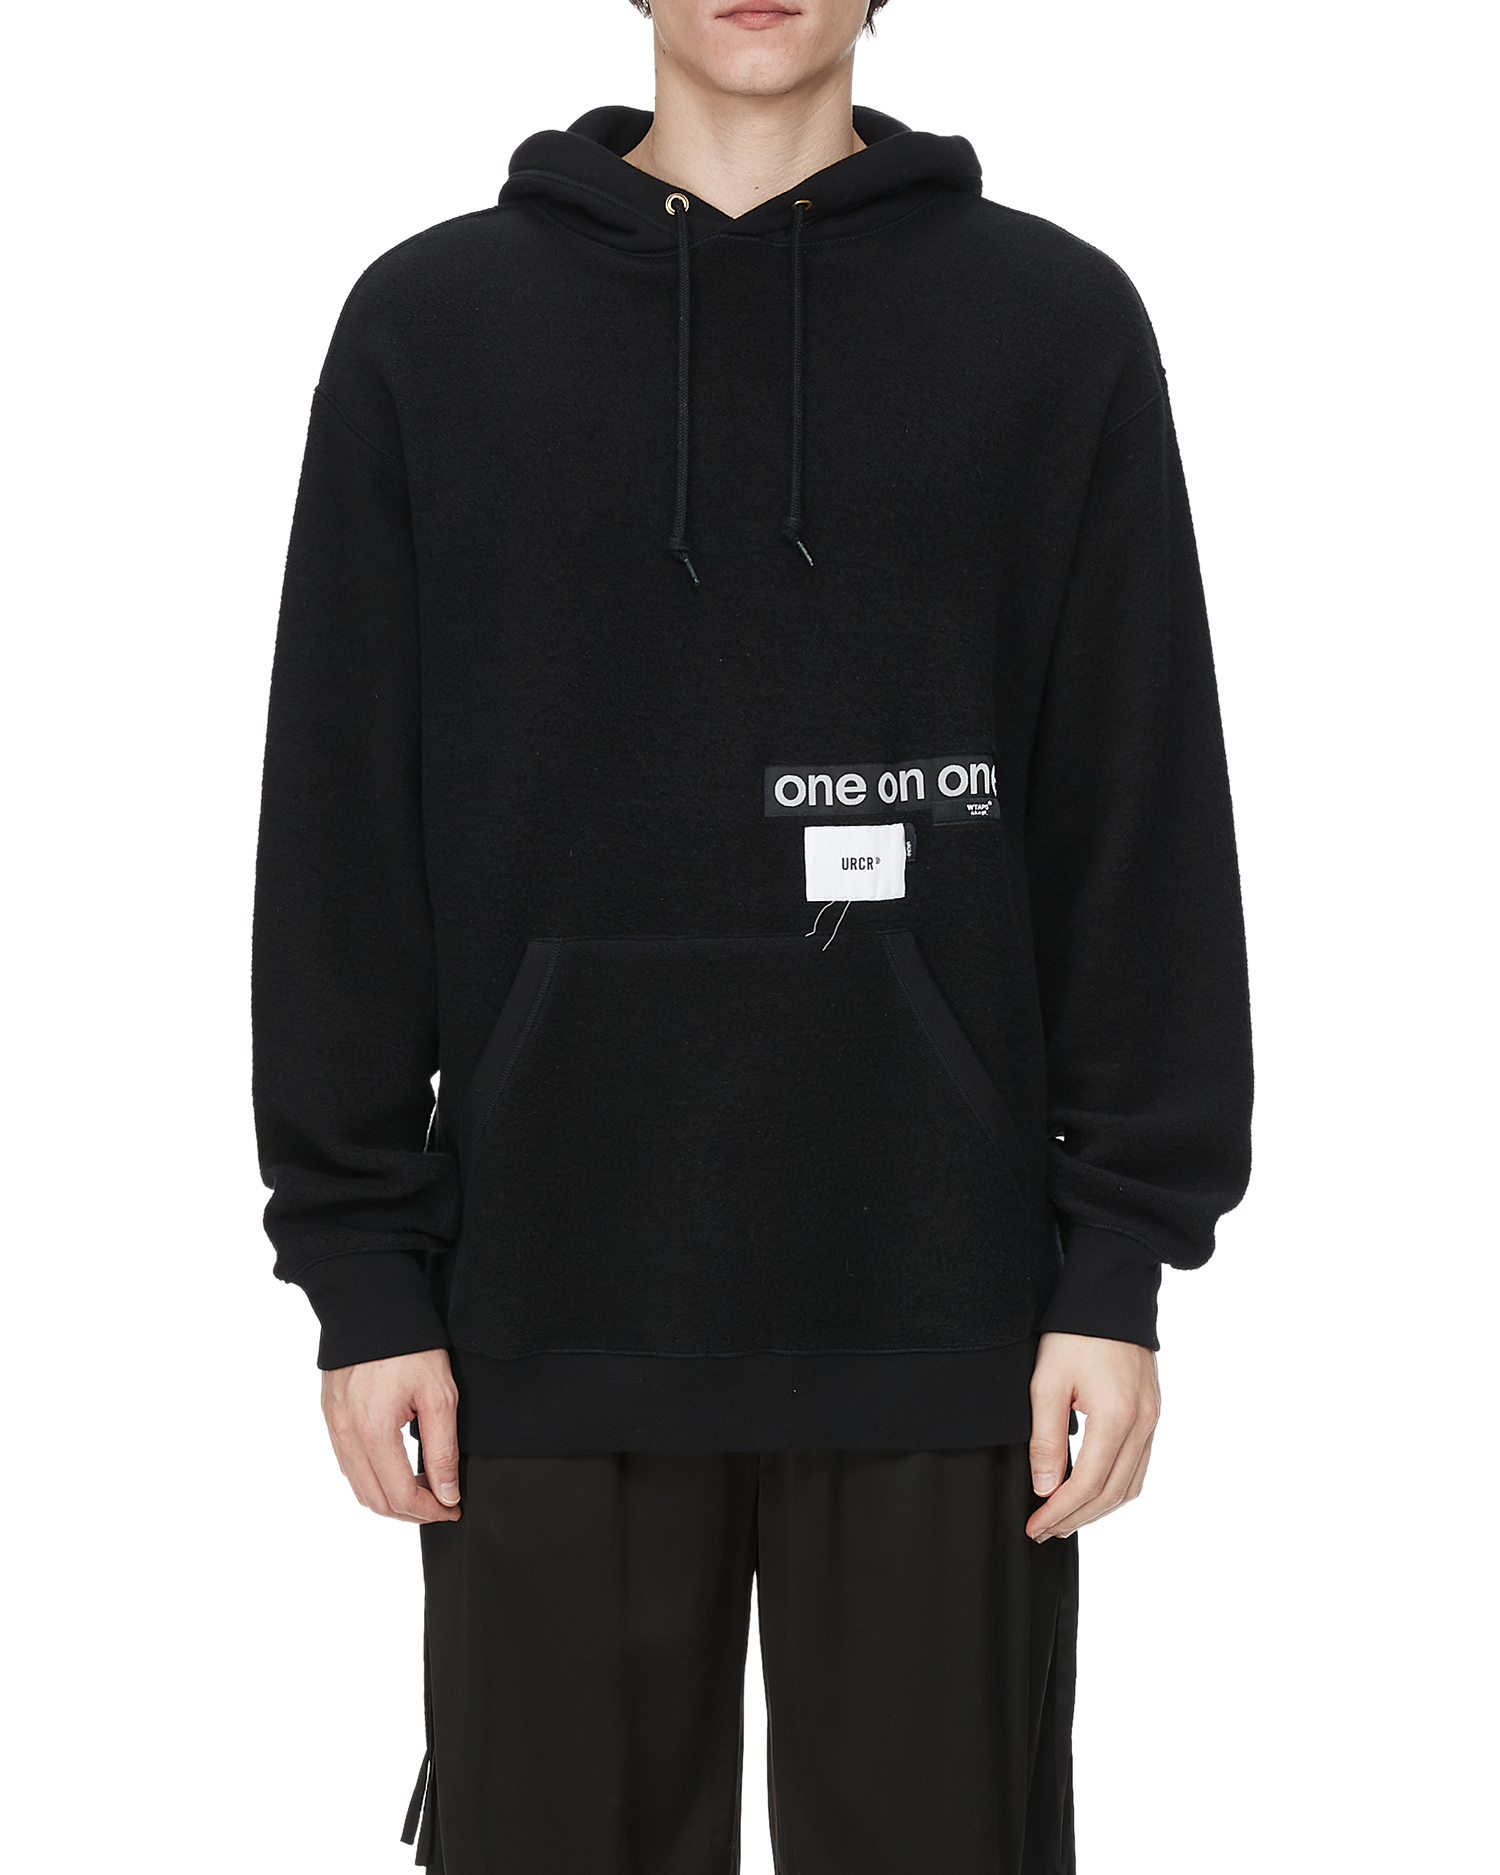 X UNDERCOVER GIG / Hooded / Cotton